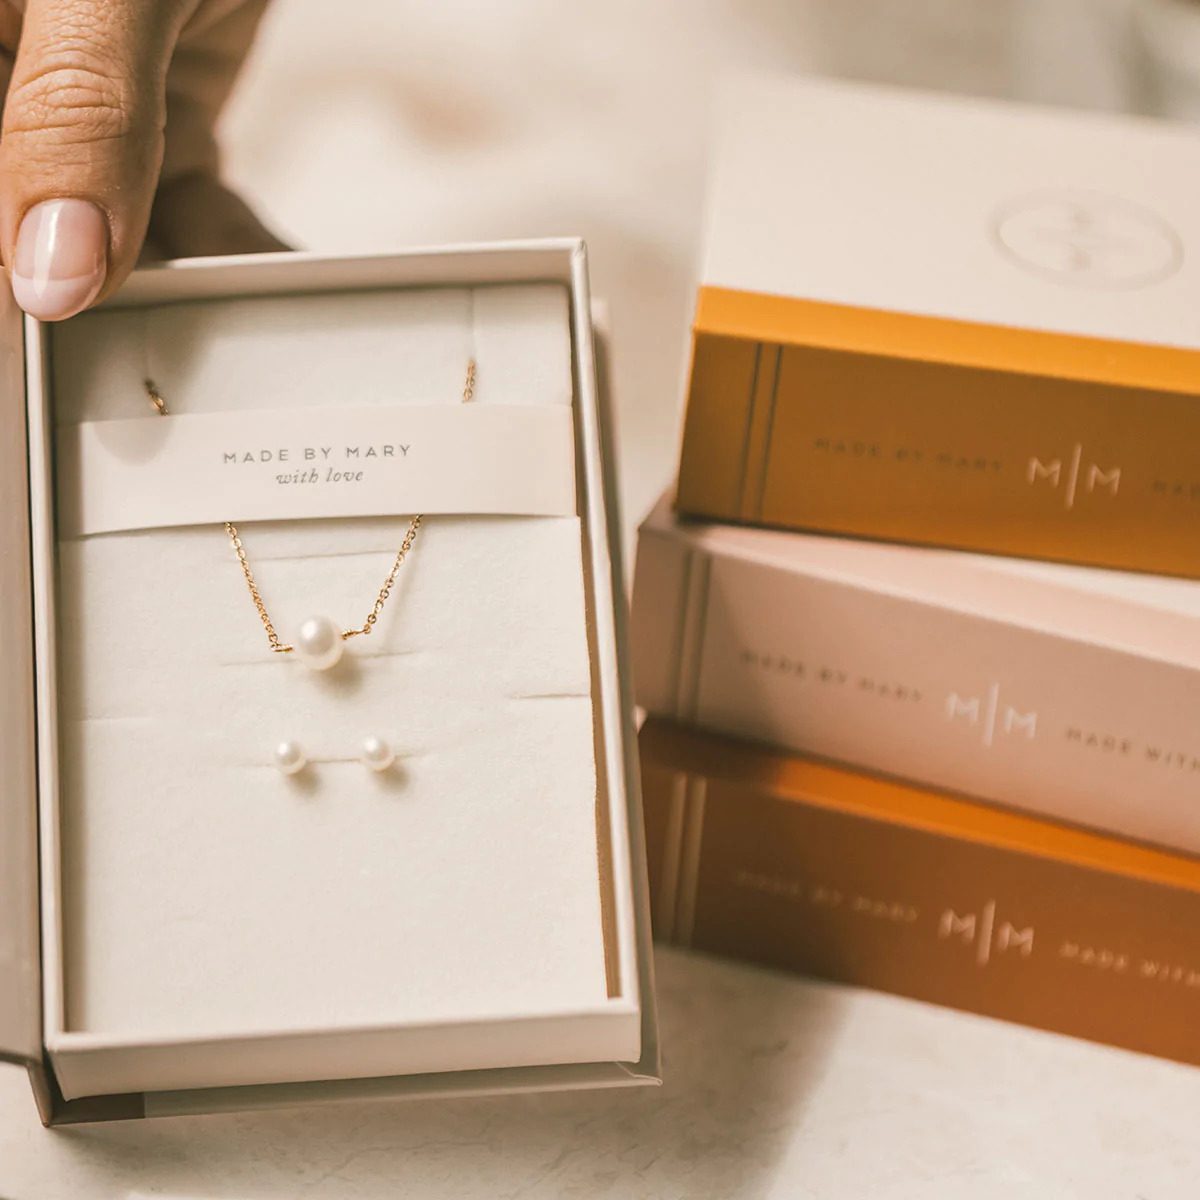 <p>Worn alone or layered with other chains, this delicate <a href="https://www.madebymary.com/products/pearl-necklace">necklace</a> with a solitary pearl is an elevated topper for any Instagram-worthy outfit. Made of gold vermeil by beloved women-owned jewelry brand Made By Mary.</p> <p class="listicle-page__cta-button-shop"><a class="shop-btn" href="https://www.madebymary.com/products/pearl-necklace">Shop Now</a></p>